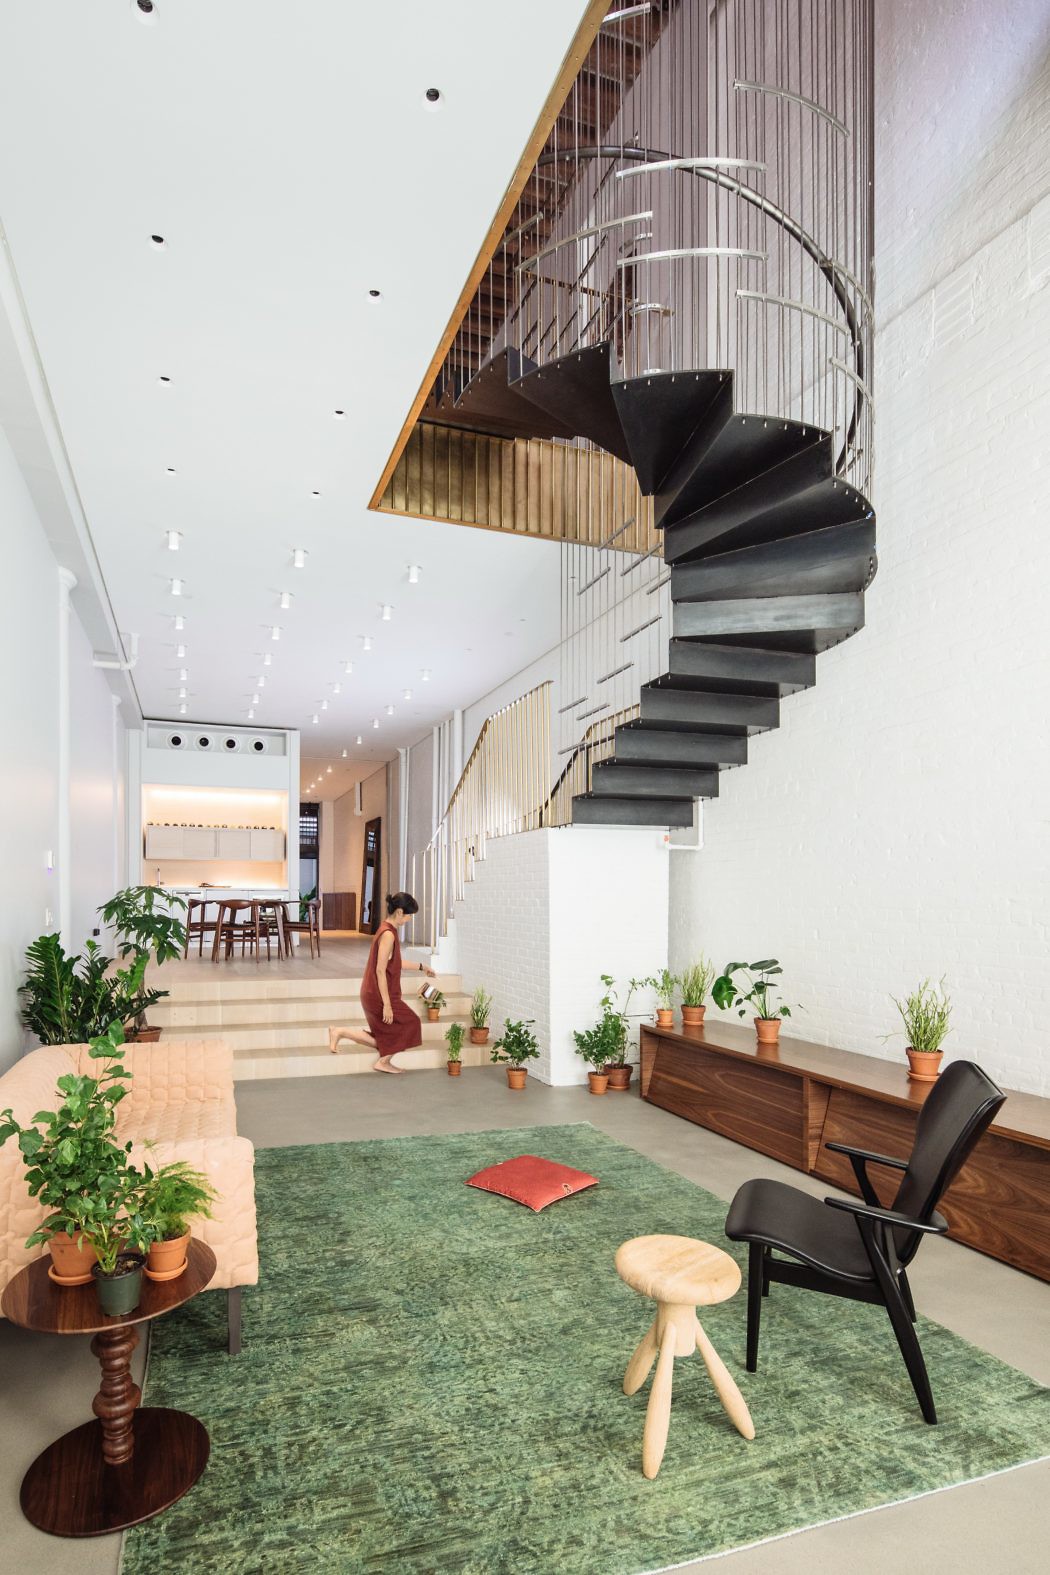 Modern interior with spiral staircase, seating area, and plants.